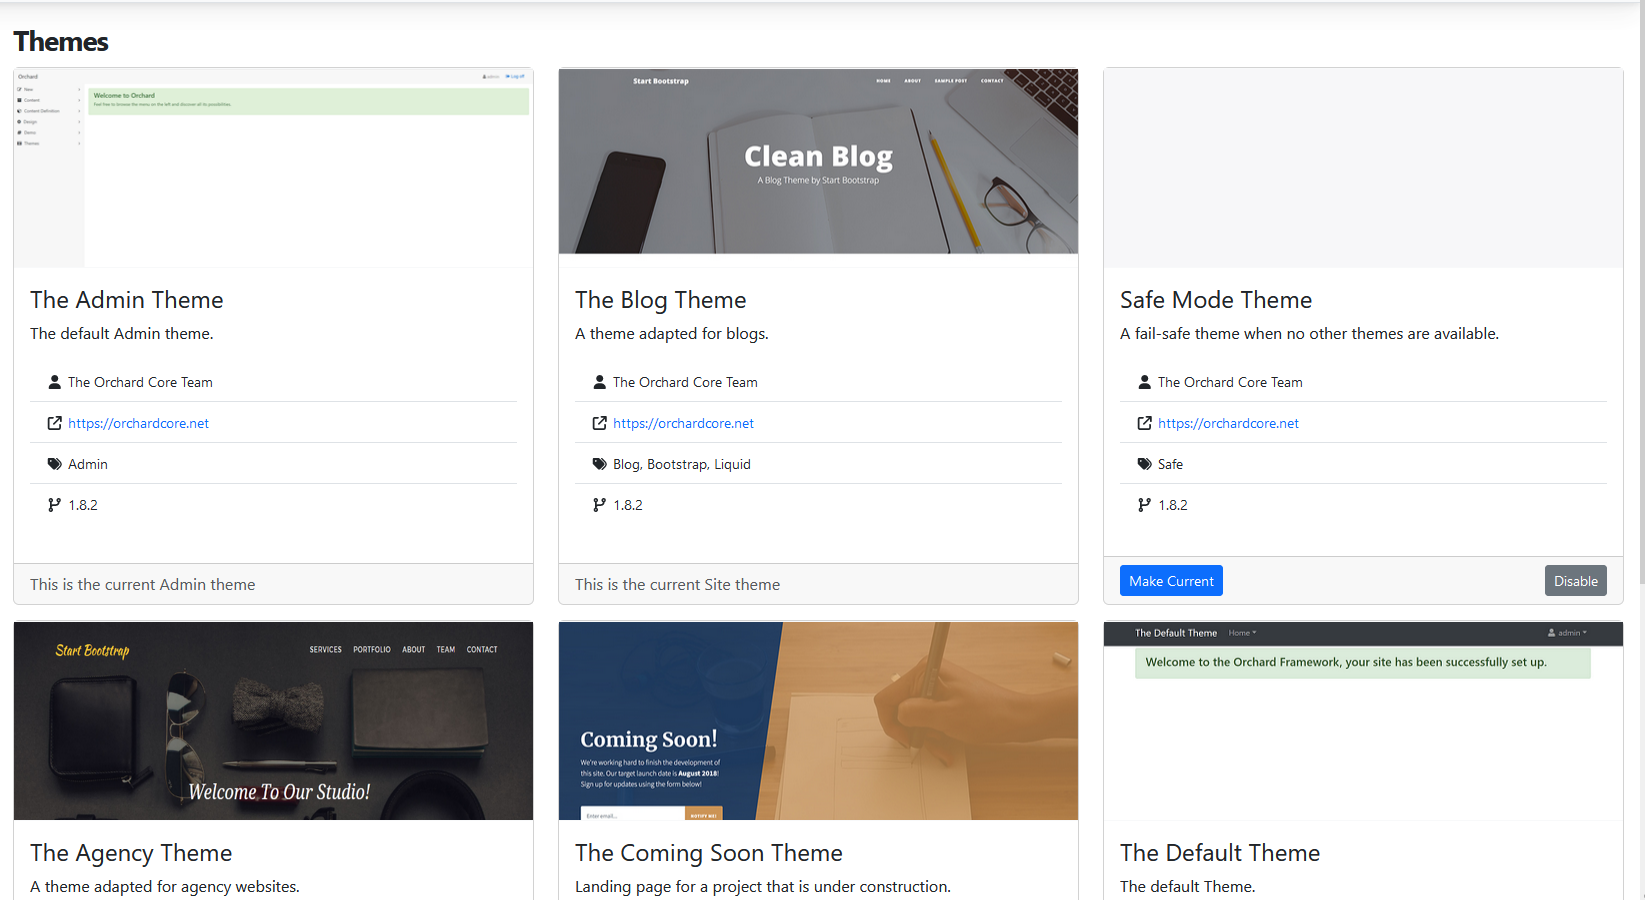 Convert Themes views to shapes